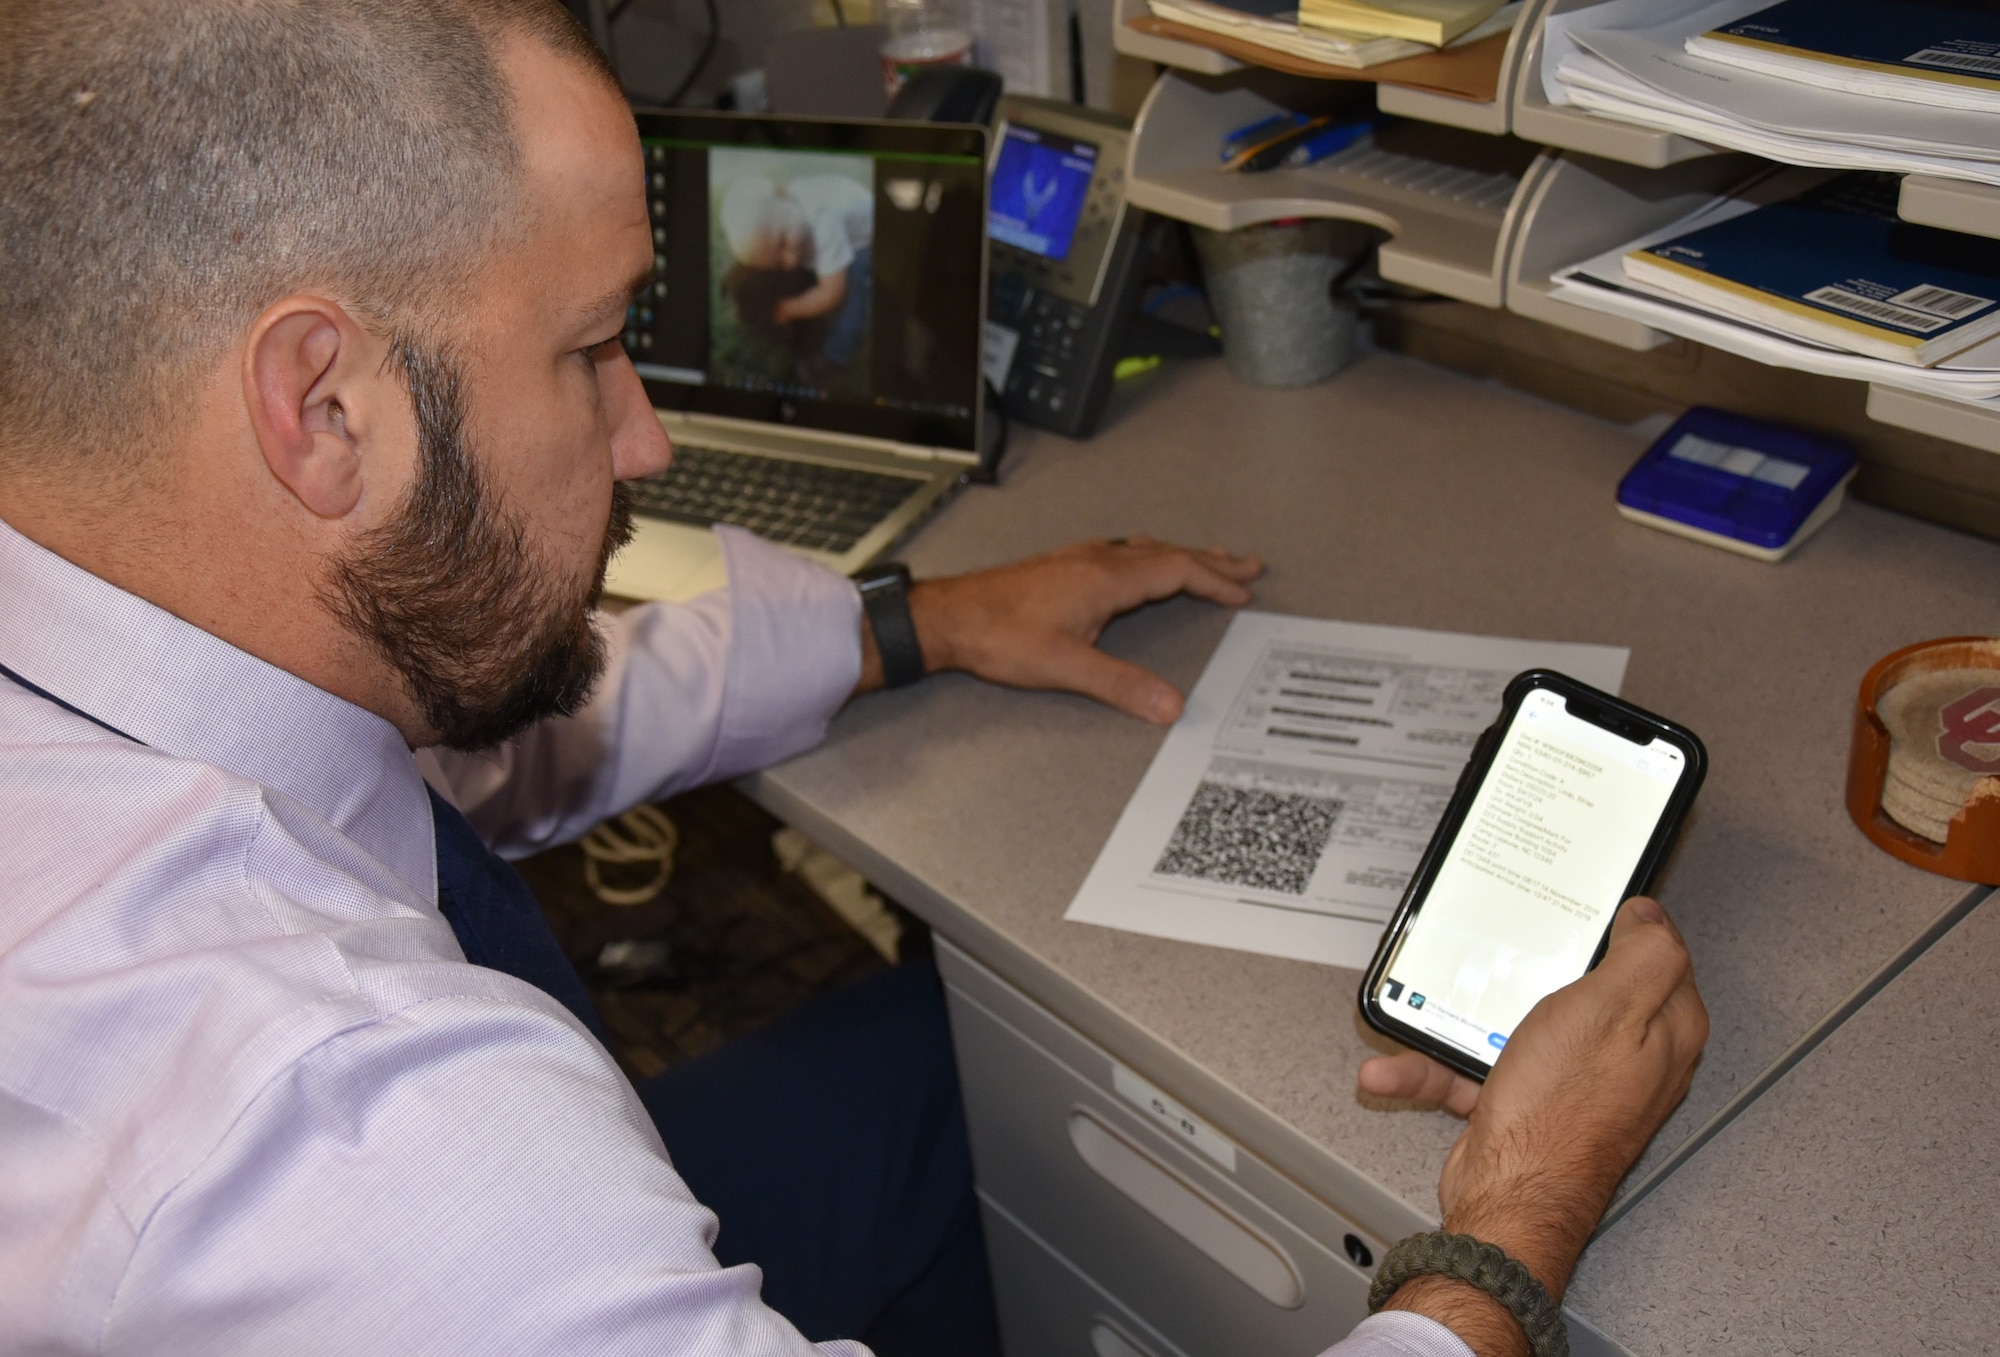 Jason Davis, 429th Supply Chain Management Squadron, demonstrates the amount of data available through a single QR code scan. Davis is an Air Force Materiel Command semi-finalist in the Spark Tank competition thanks to his idea to eliminate scanning errors and improve asset tracking by replacing four barcodes with a single QR code on a DOD form.